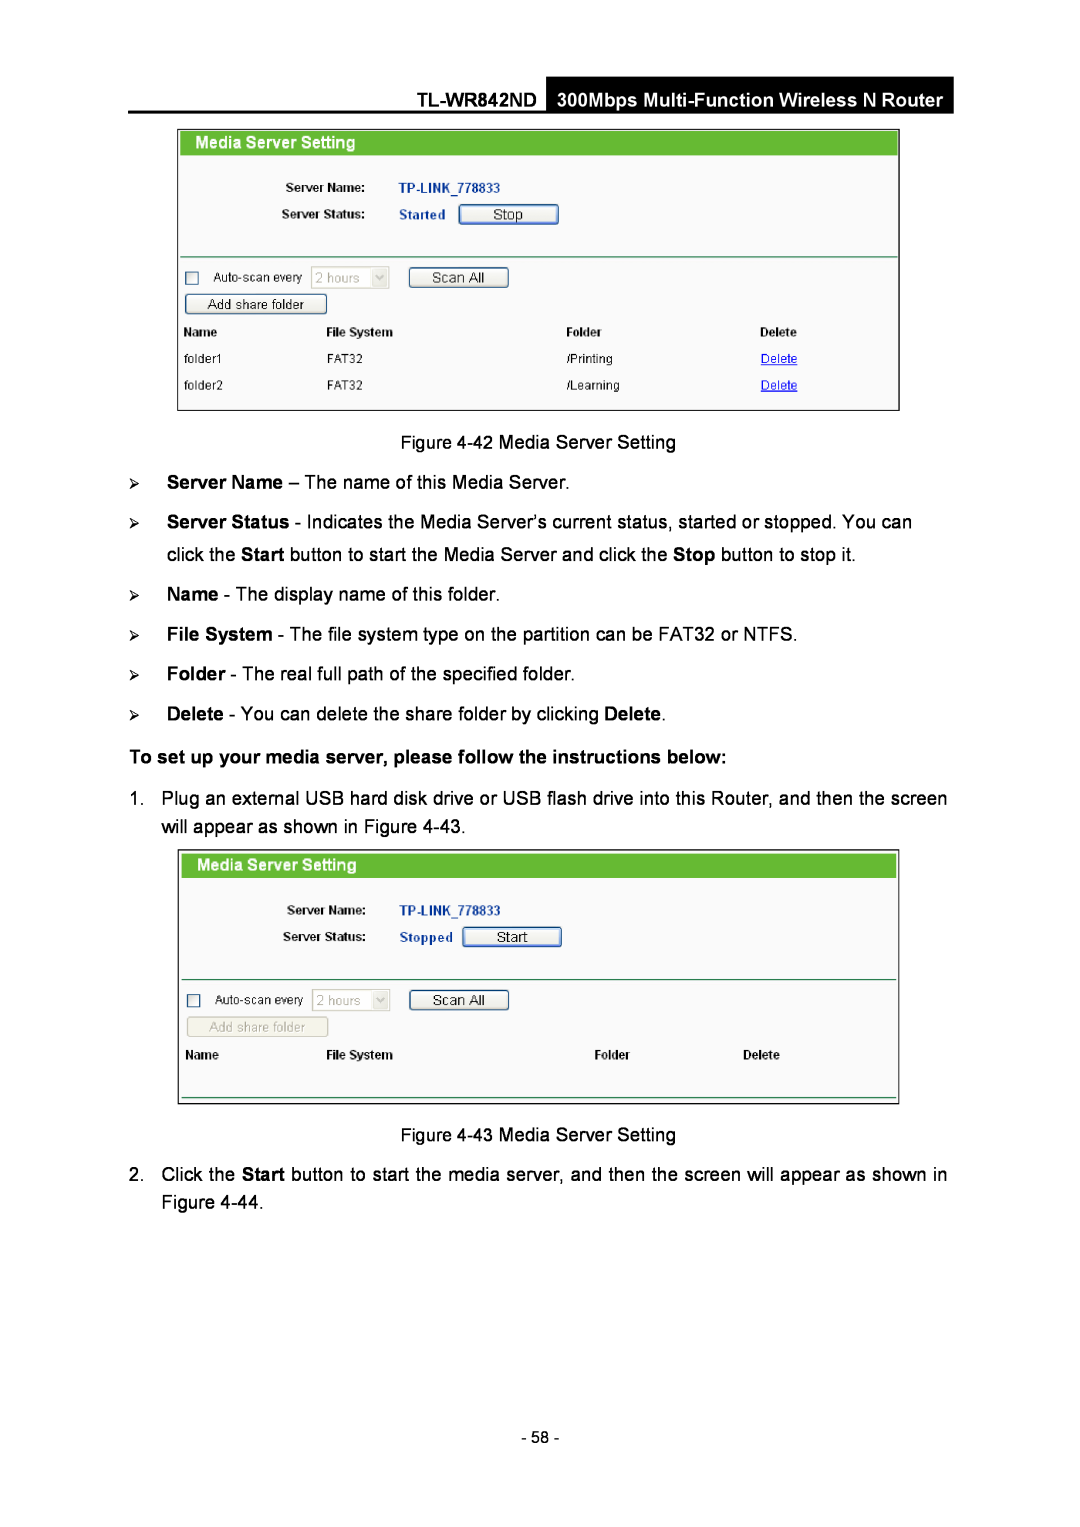 TP-Link WR-842ND manual To set up your media server, please follow the instructions below 